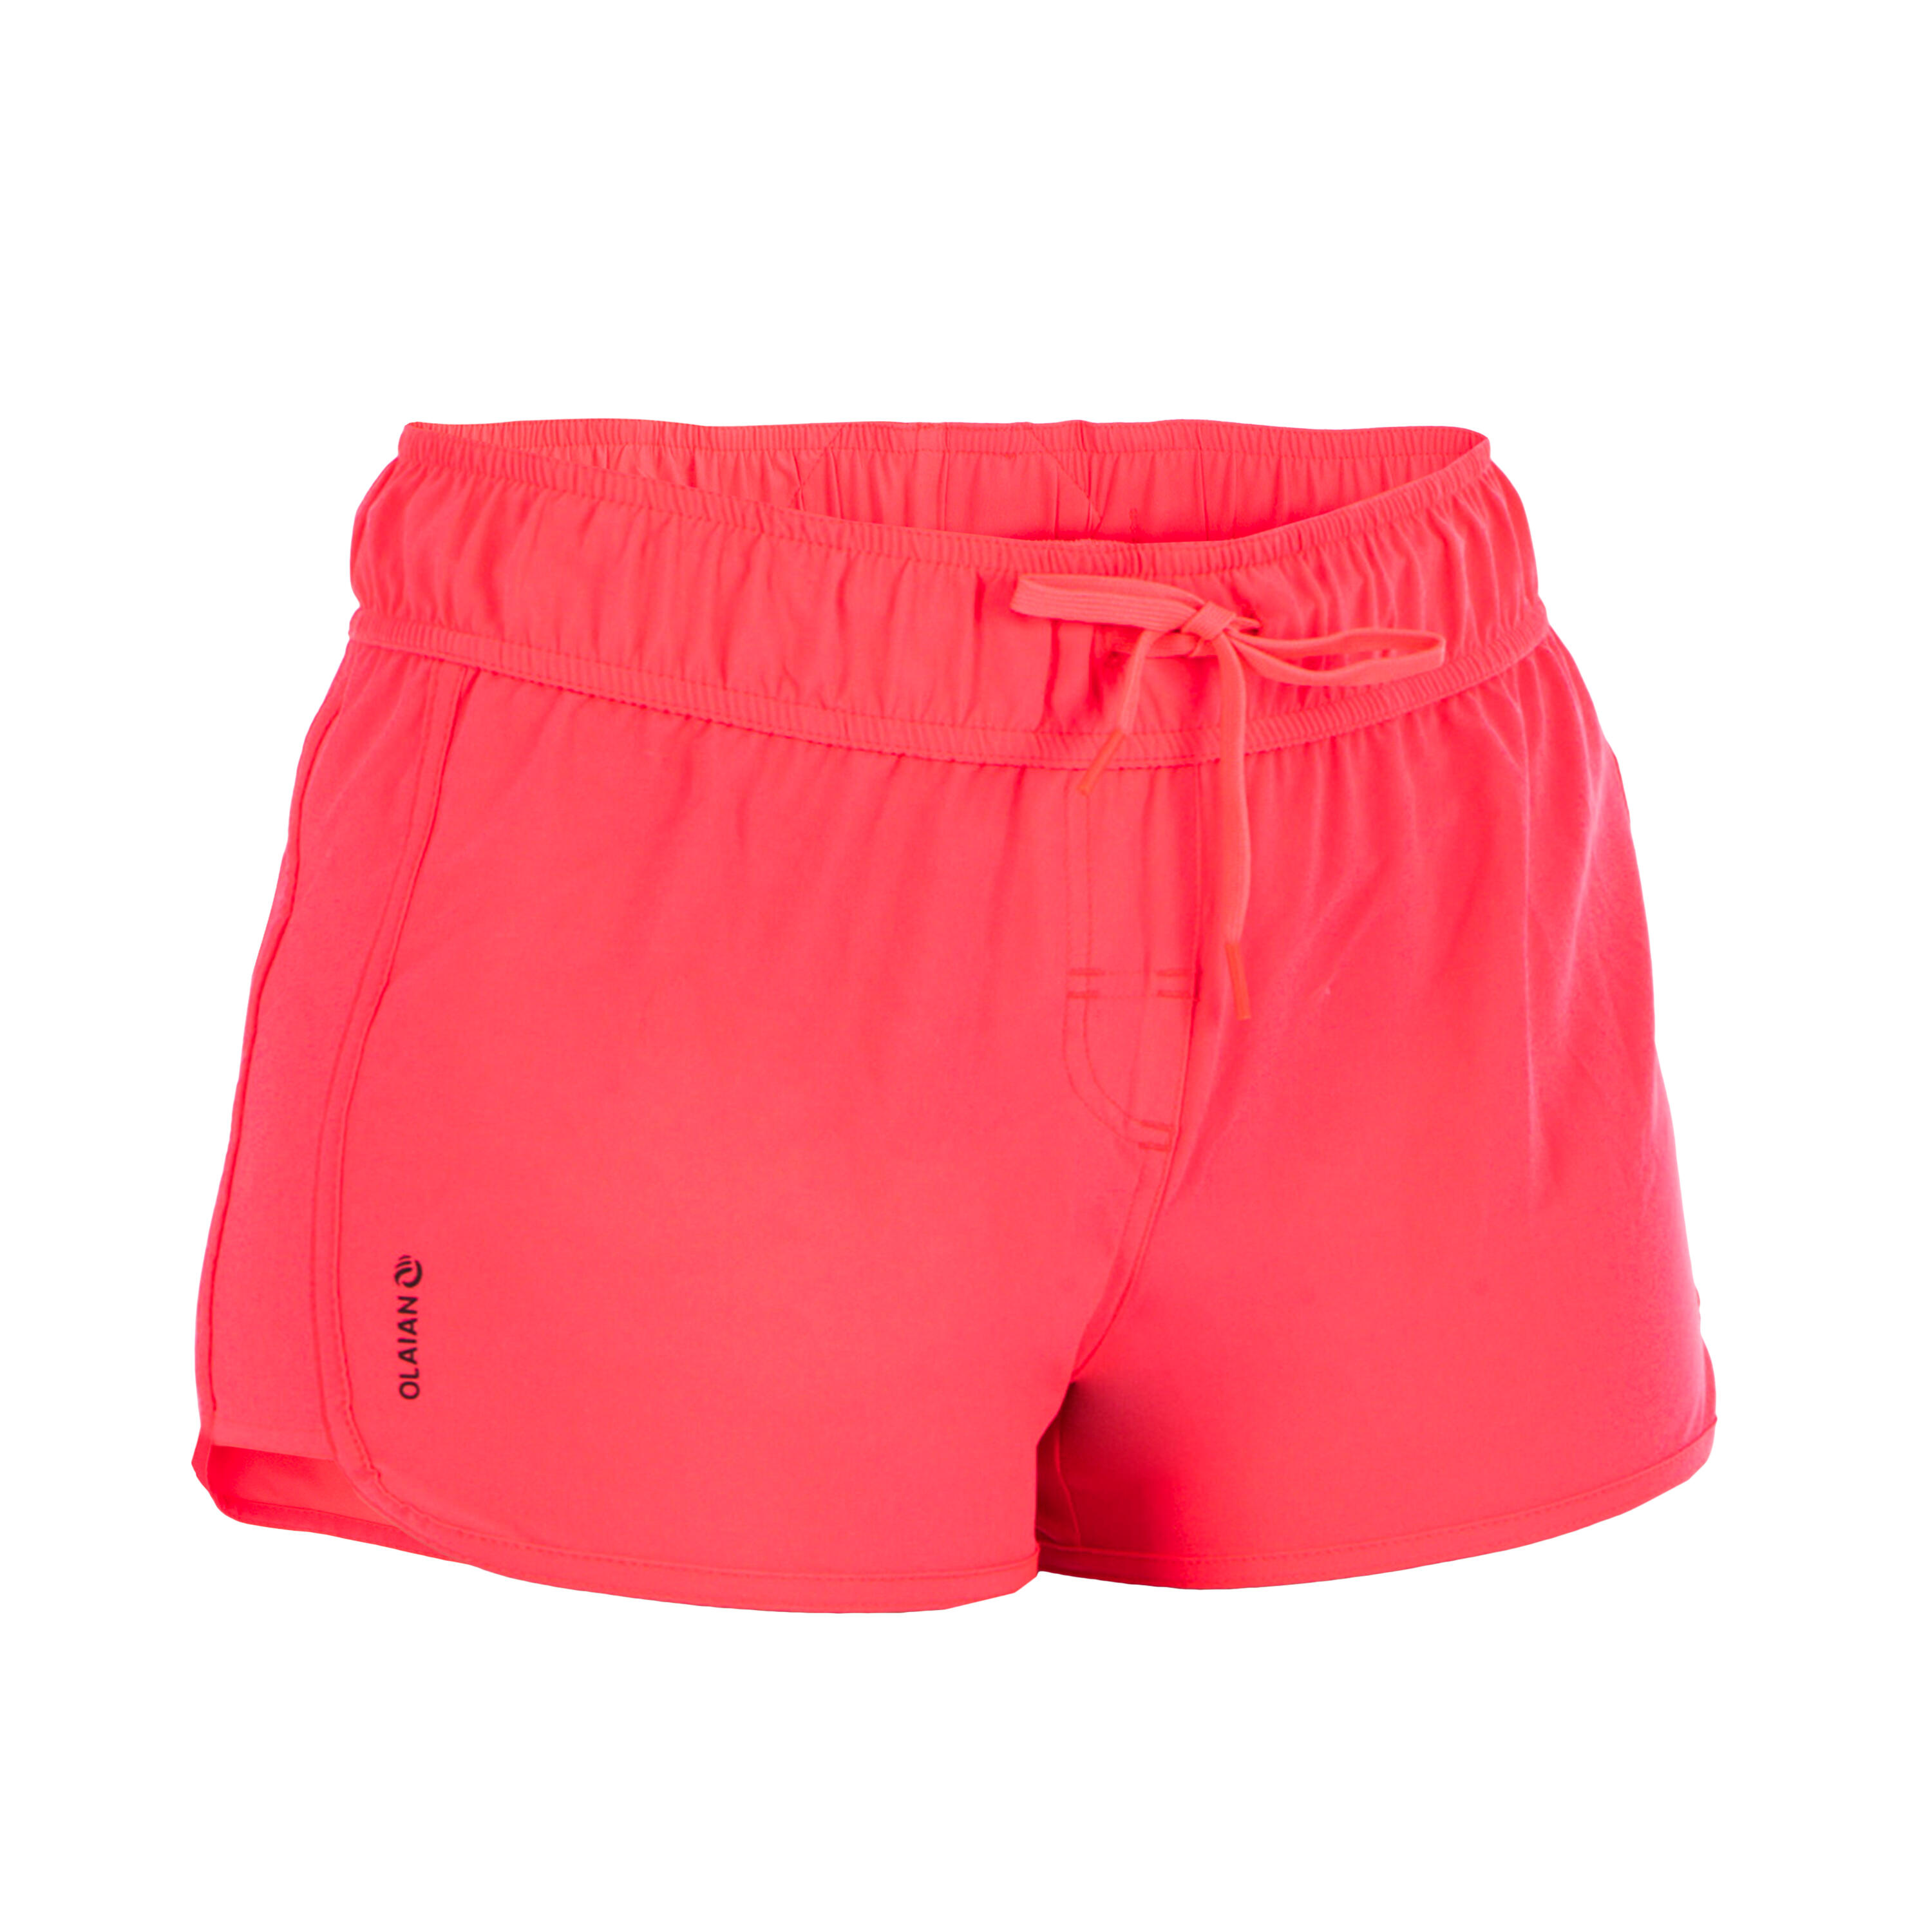 Women's boardshorts with elastic waistband and drawstring TINI CORAIL 2/7